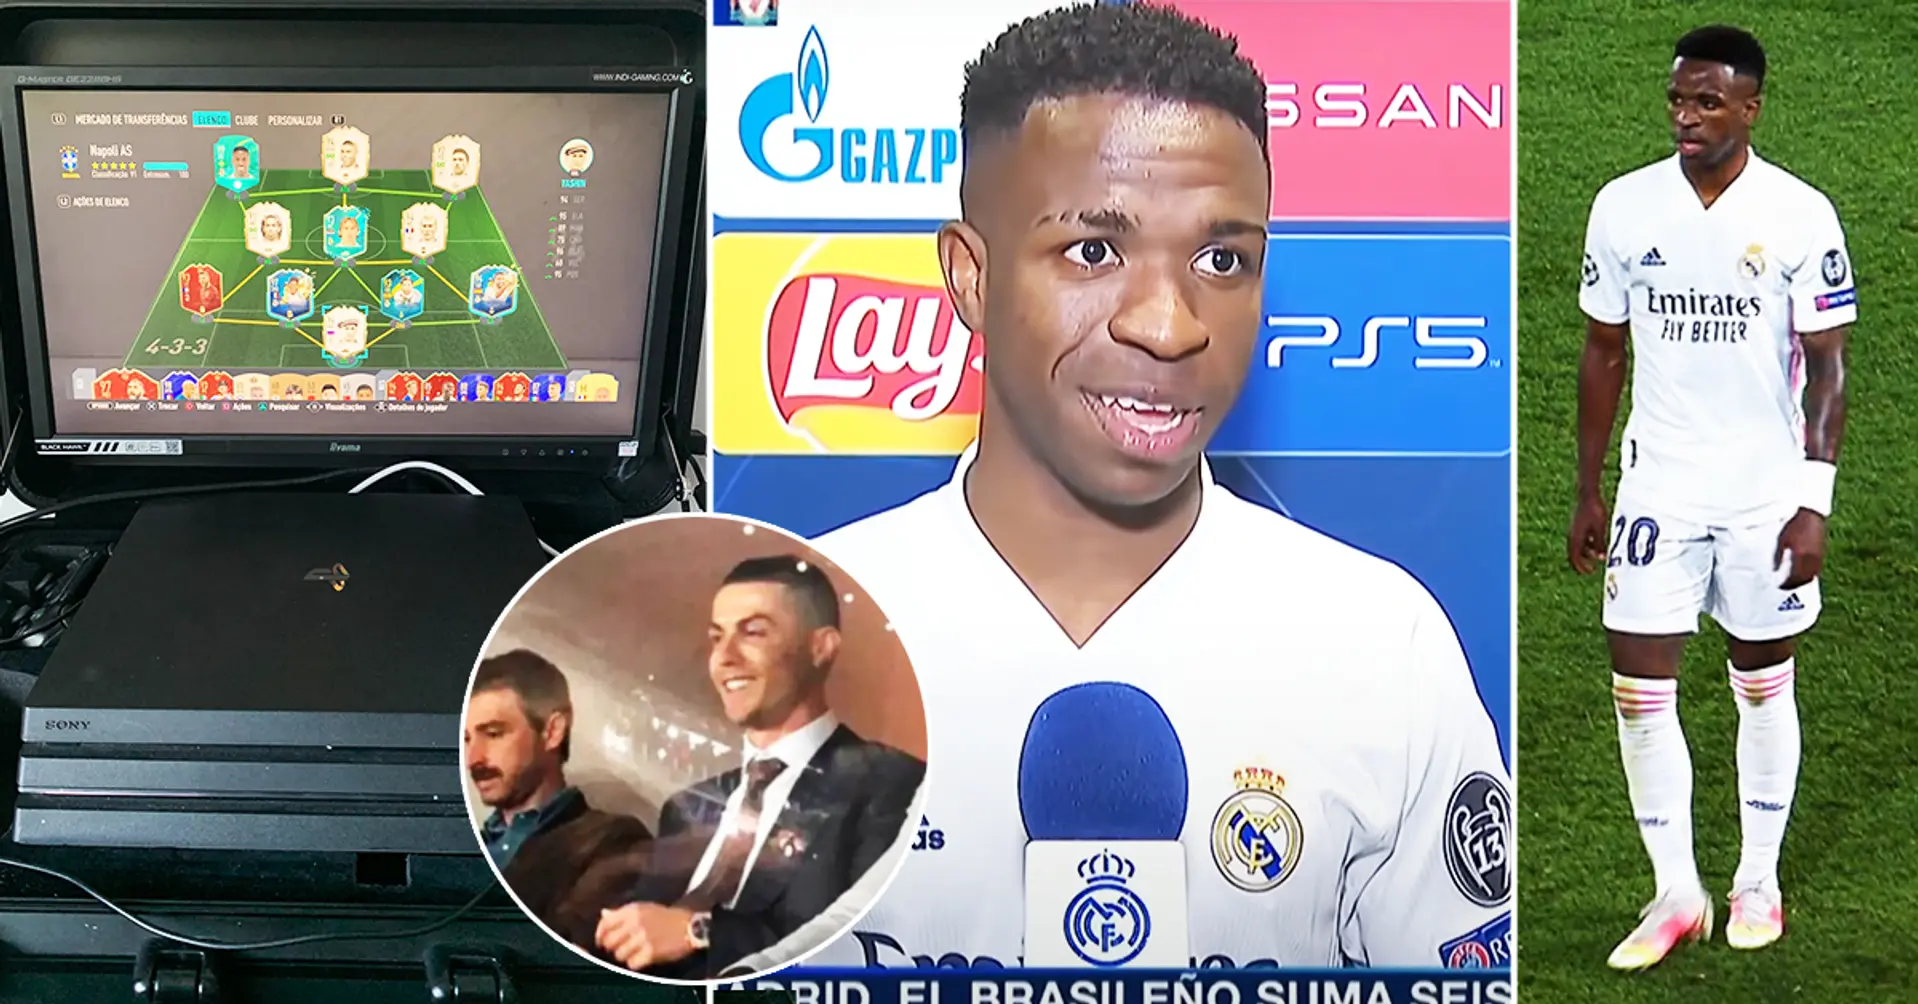 Vinicius Jr reveals his incredible Ultimate Team lineup – he didn't include CR7 or Lionel Messi